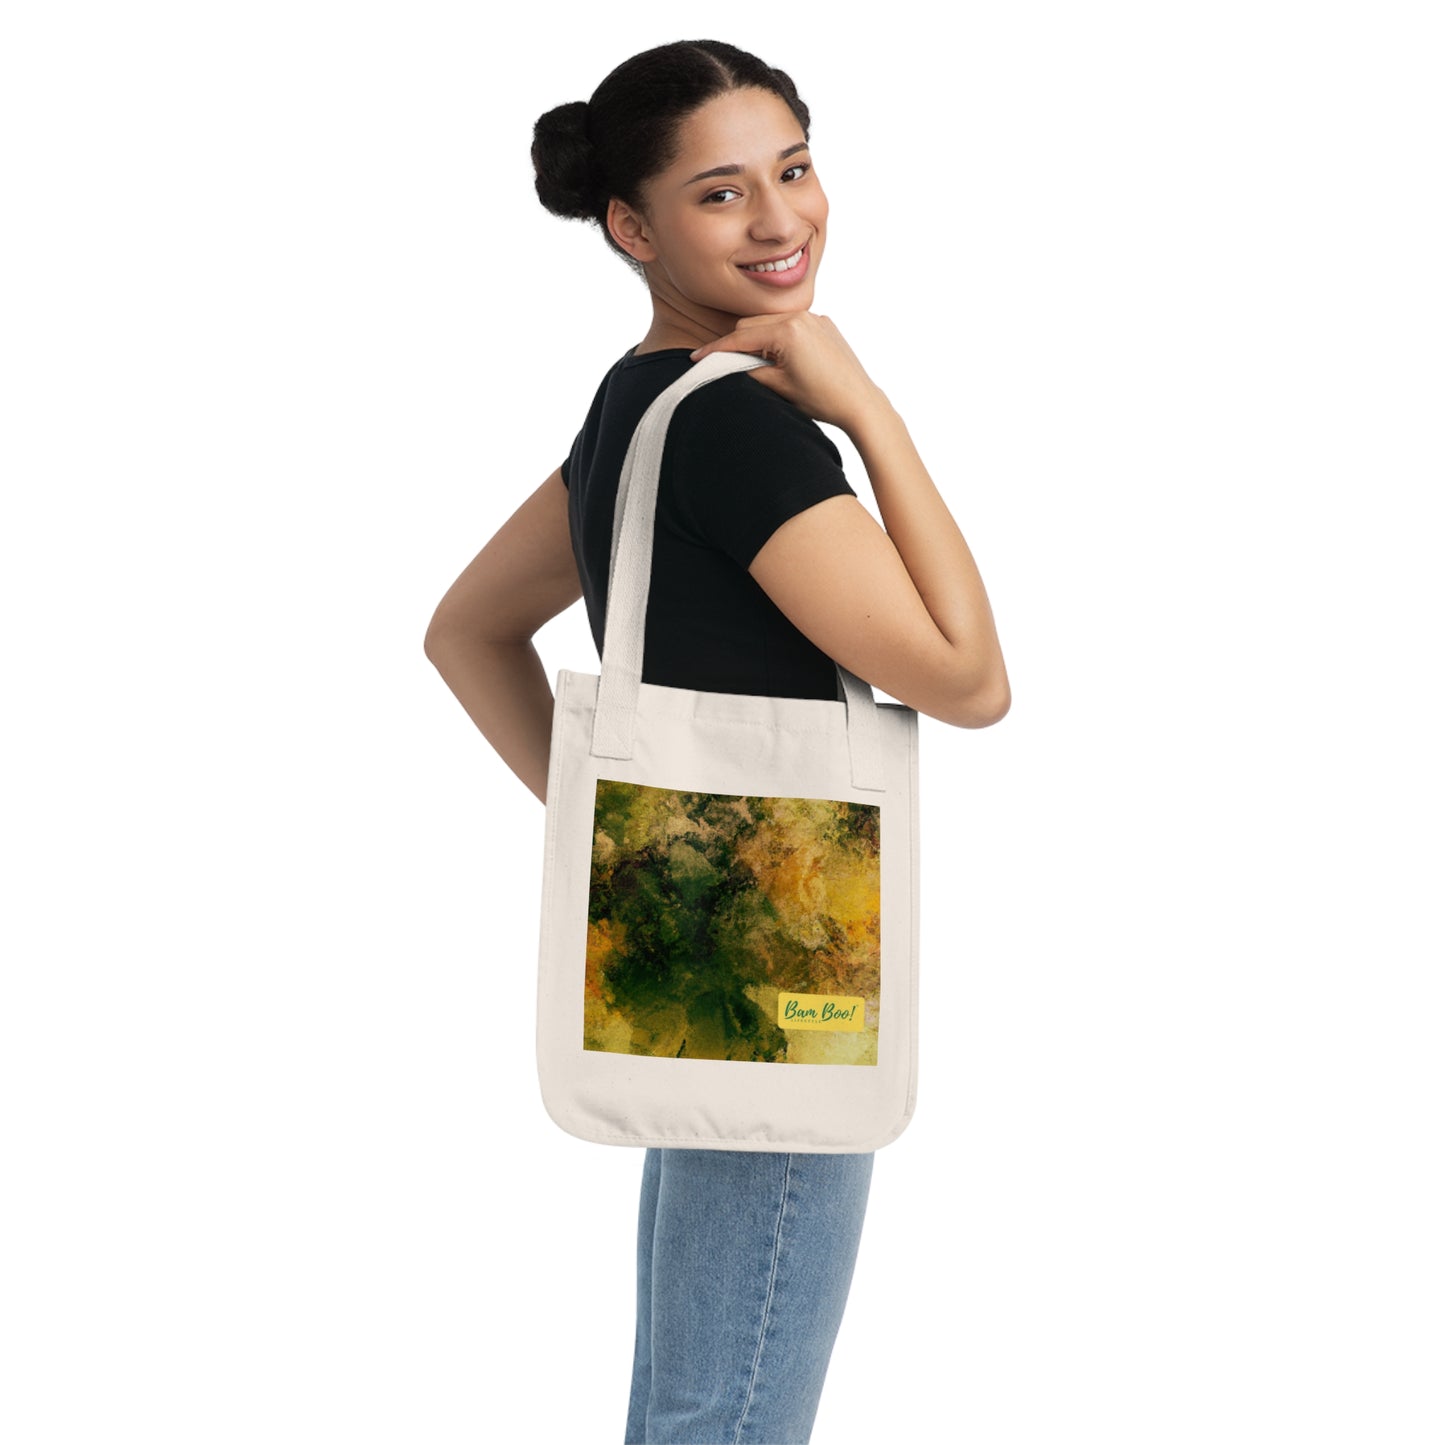 “Nature in Harmony: A Harmonic Abstract Artpiece.” - Bam Boo! Lifestyle Eco-friendly Tote Bag